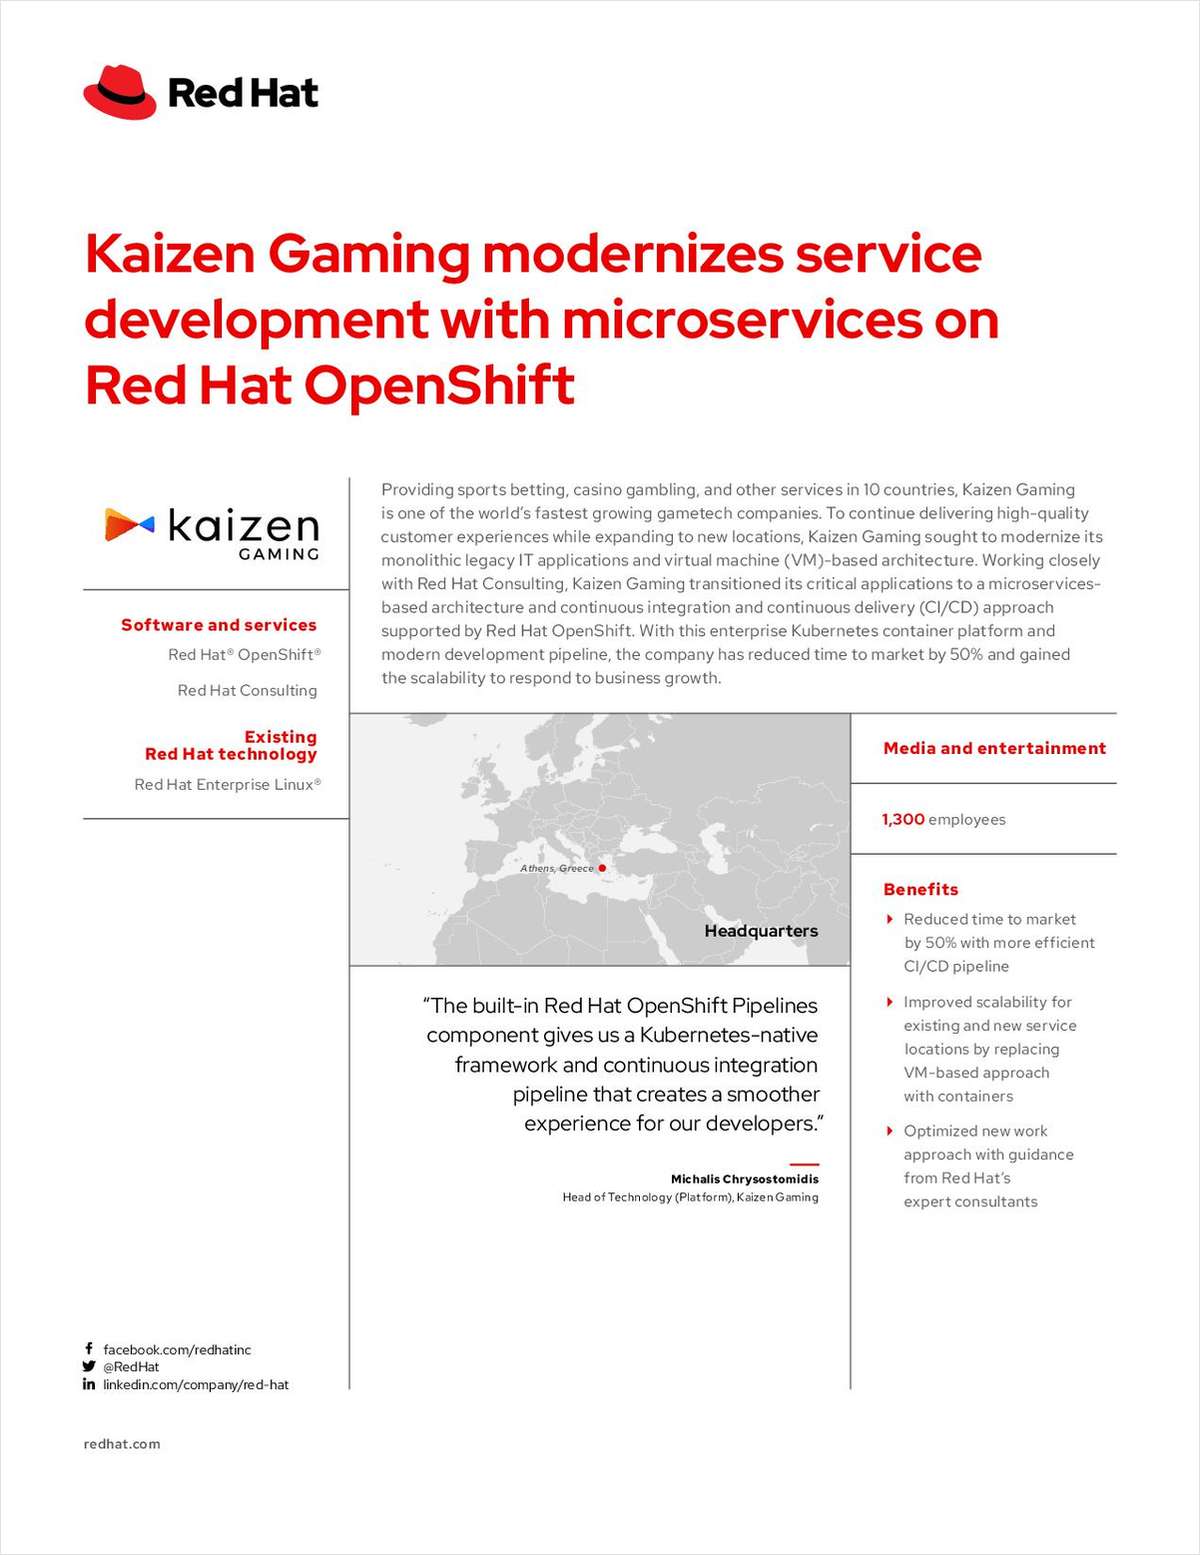 Kaizen Gaming modernizes service development with microservices on Red Hat OpenShift